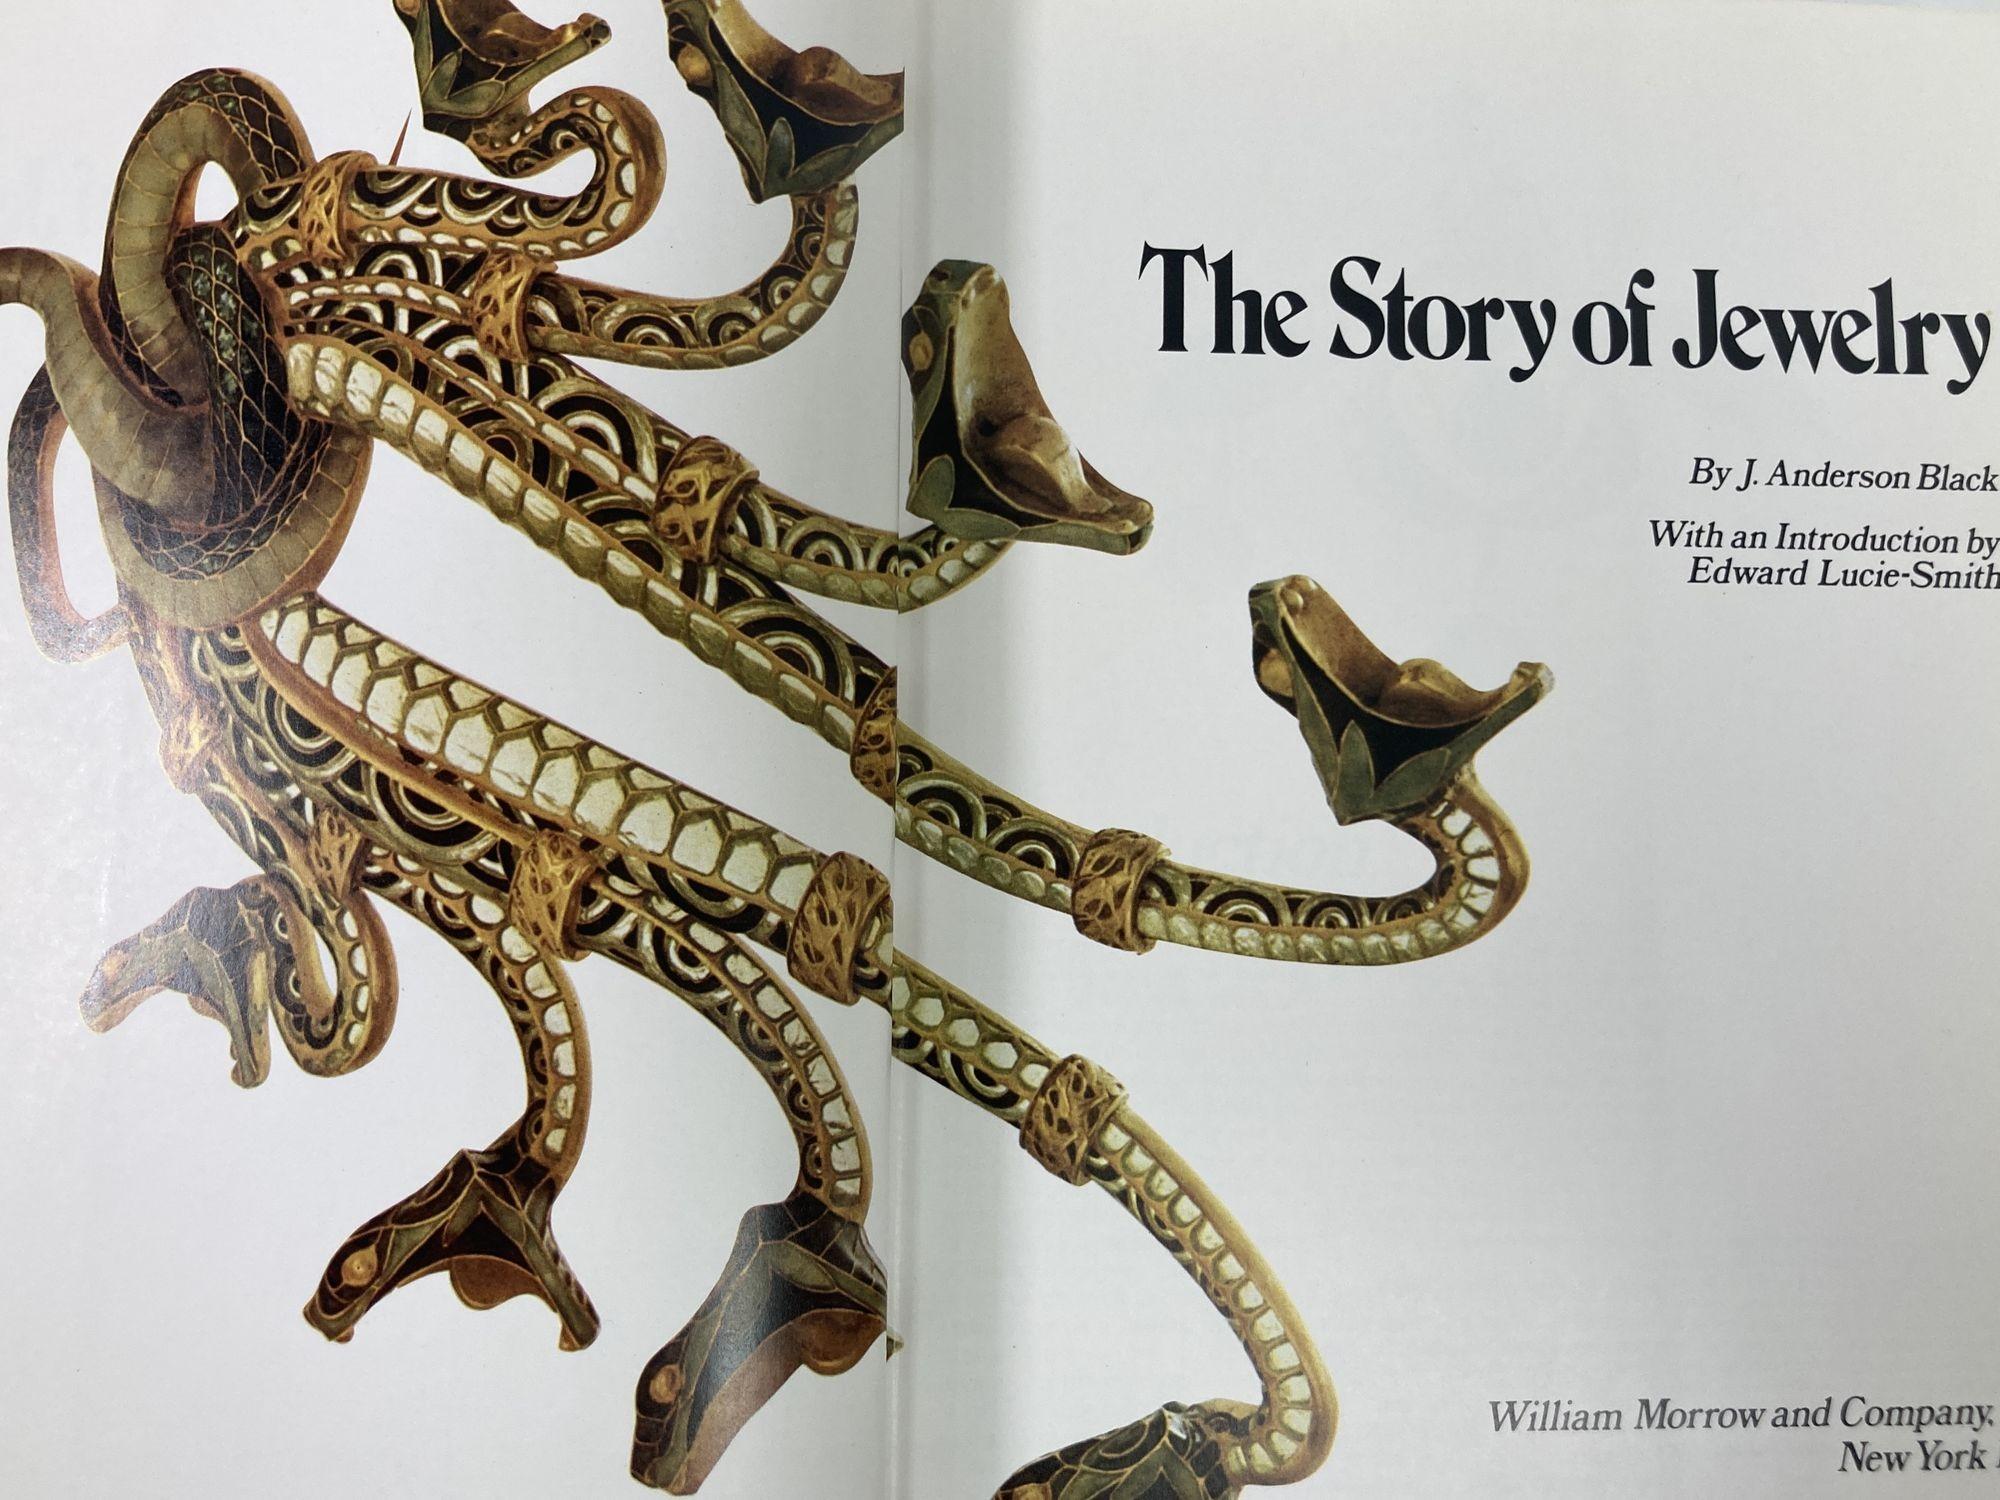 The Story of Jewelry 1st ED. 1973 von J. Anderson, Hardcoverbuch (Papier) im Angebot